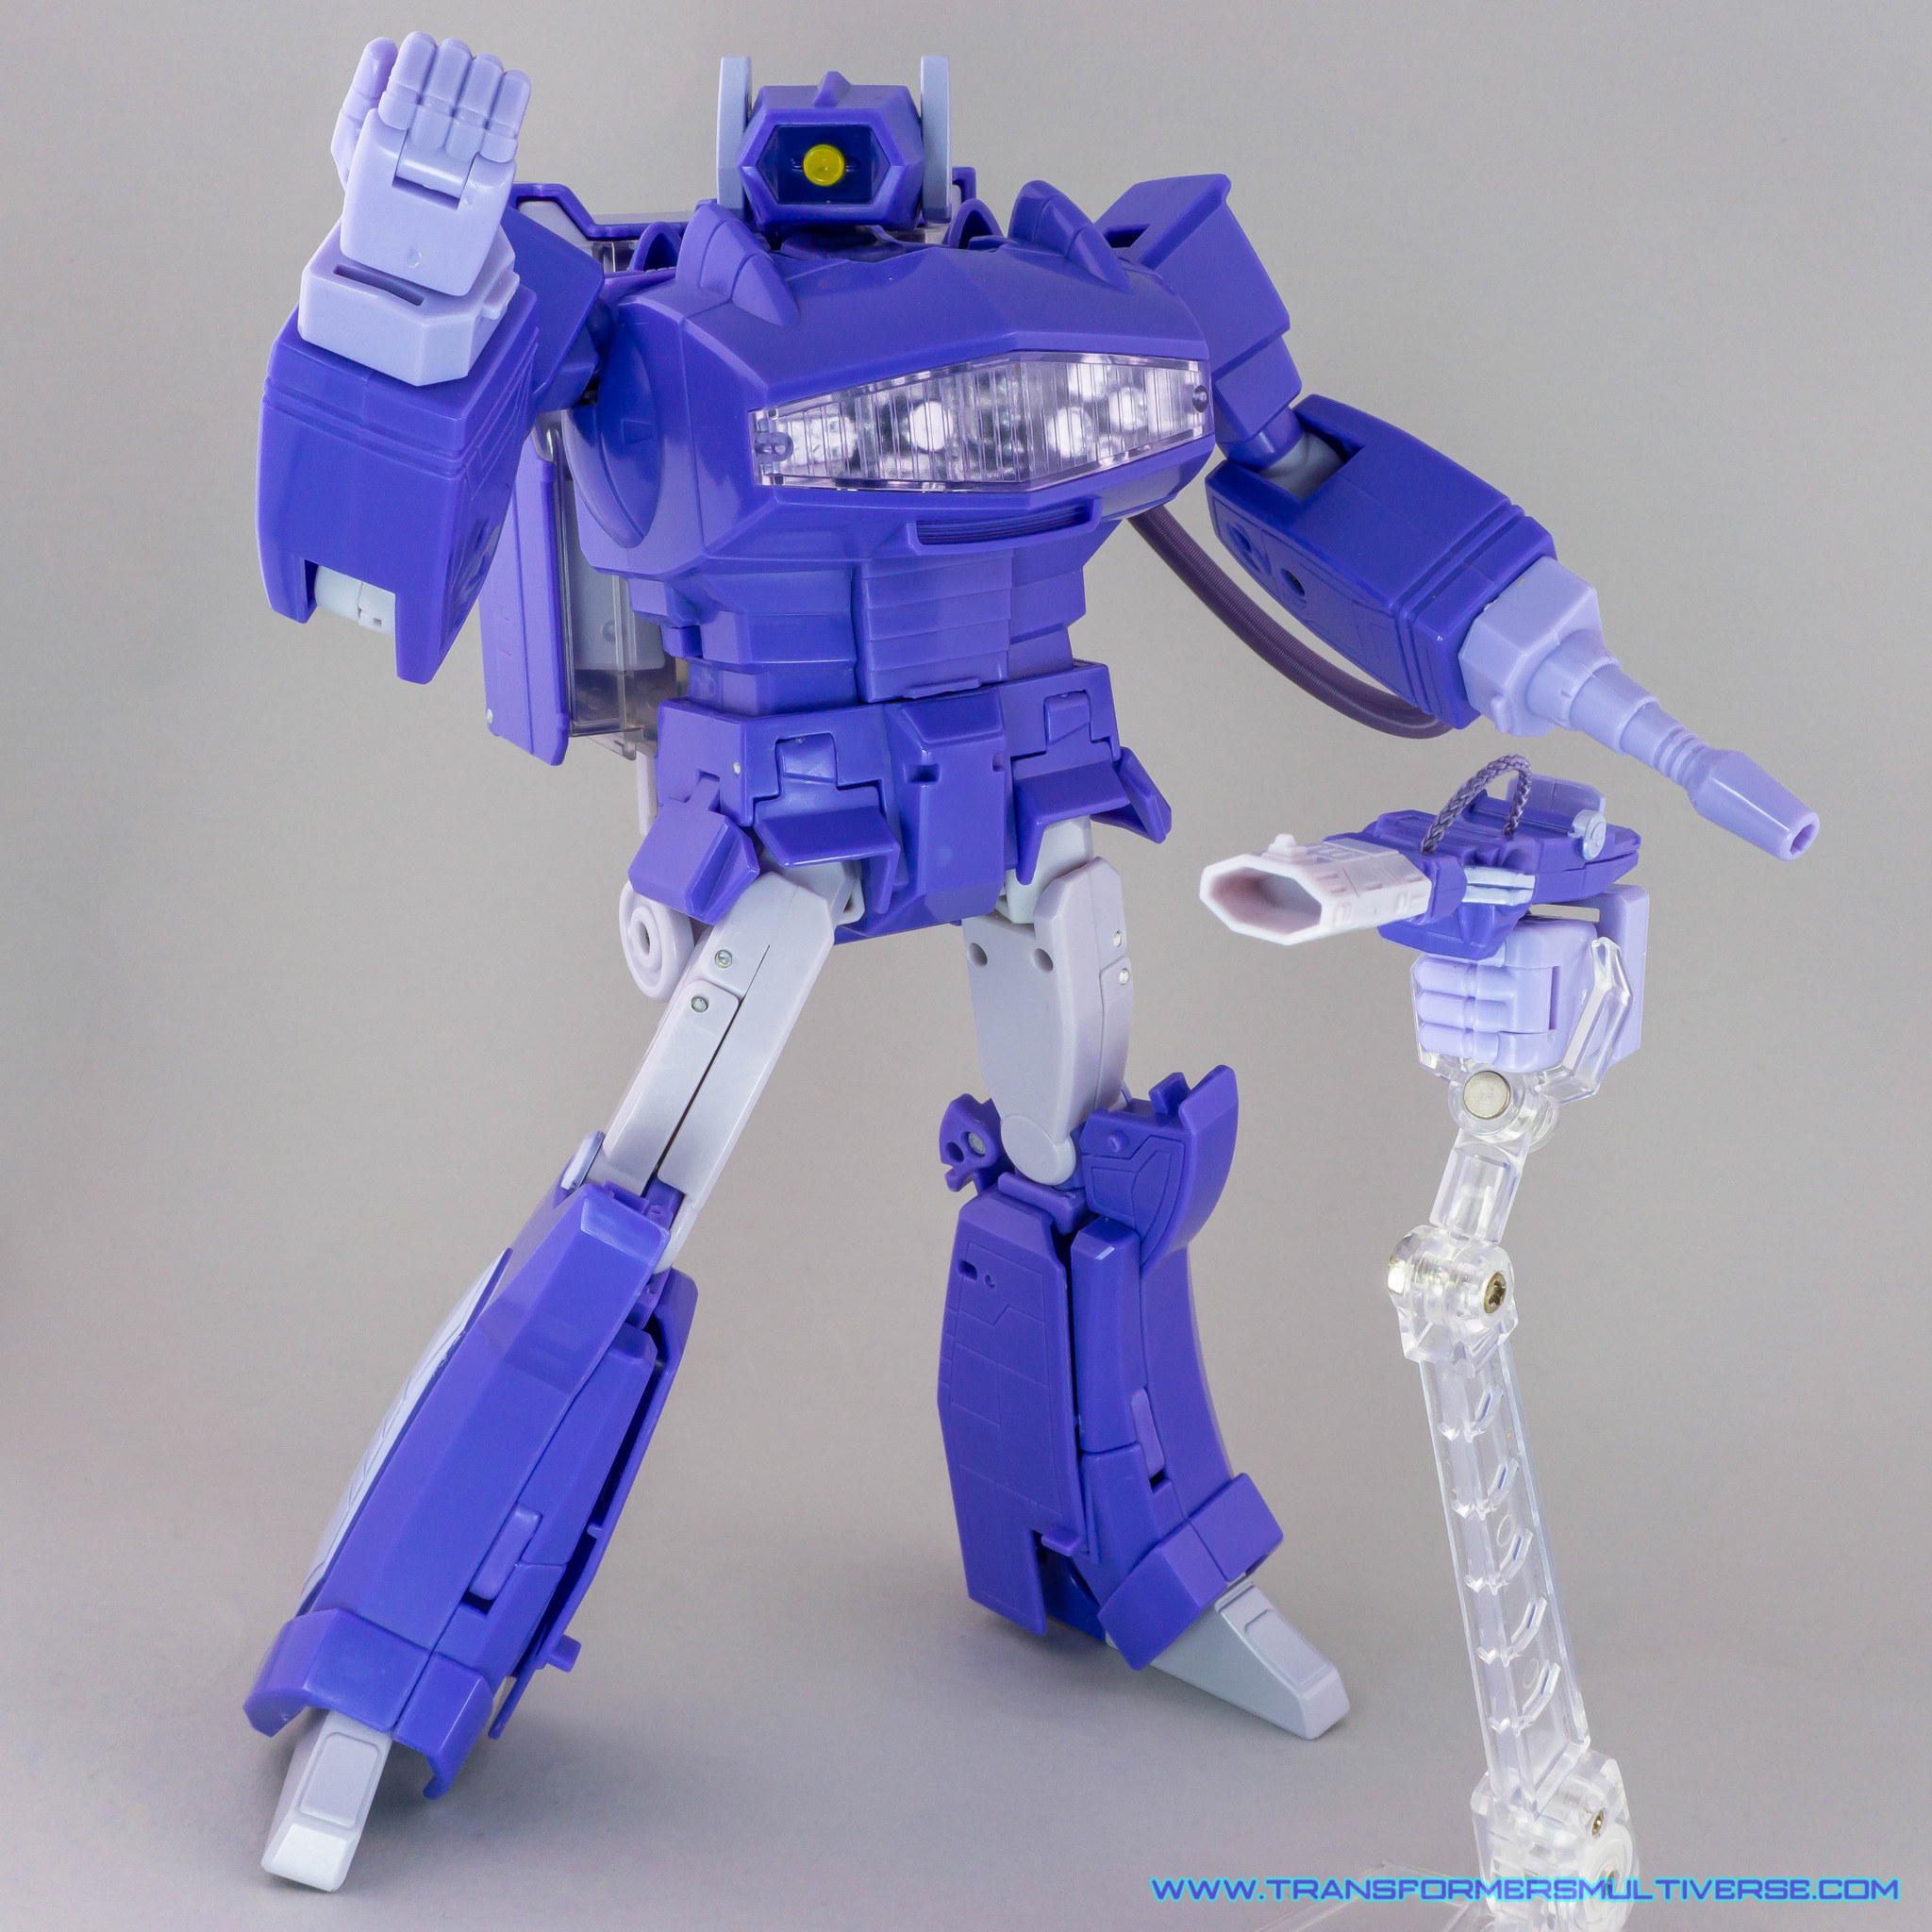 Transformers Masterpiece Shockwave with right hand 'combat drone'